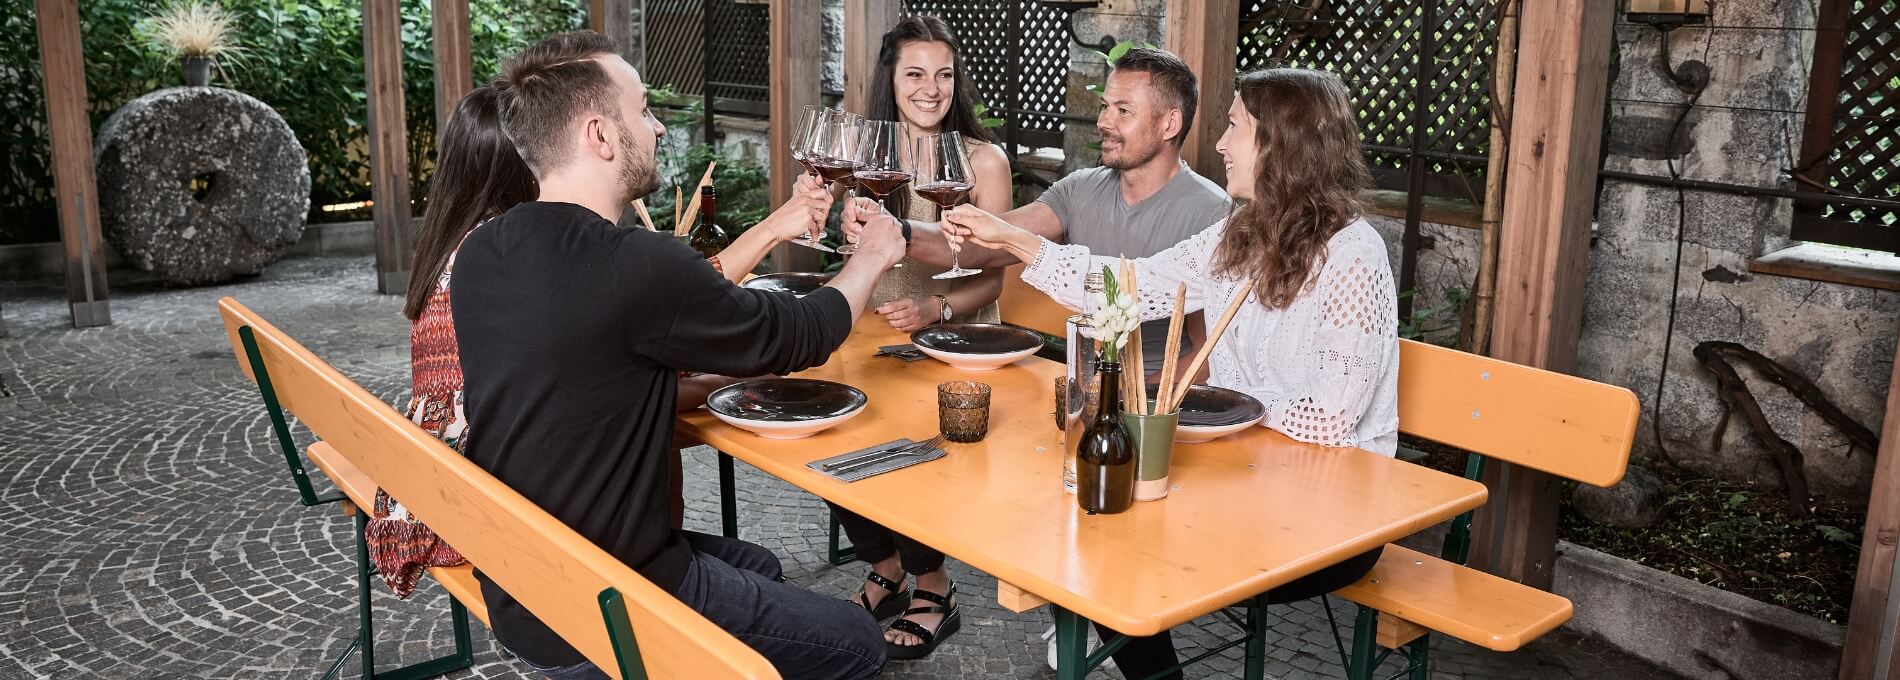 Five people are sitting in the outdoor area of a restaurant on a wide beer table set with a backrest, clinking glasses of red wine.